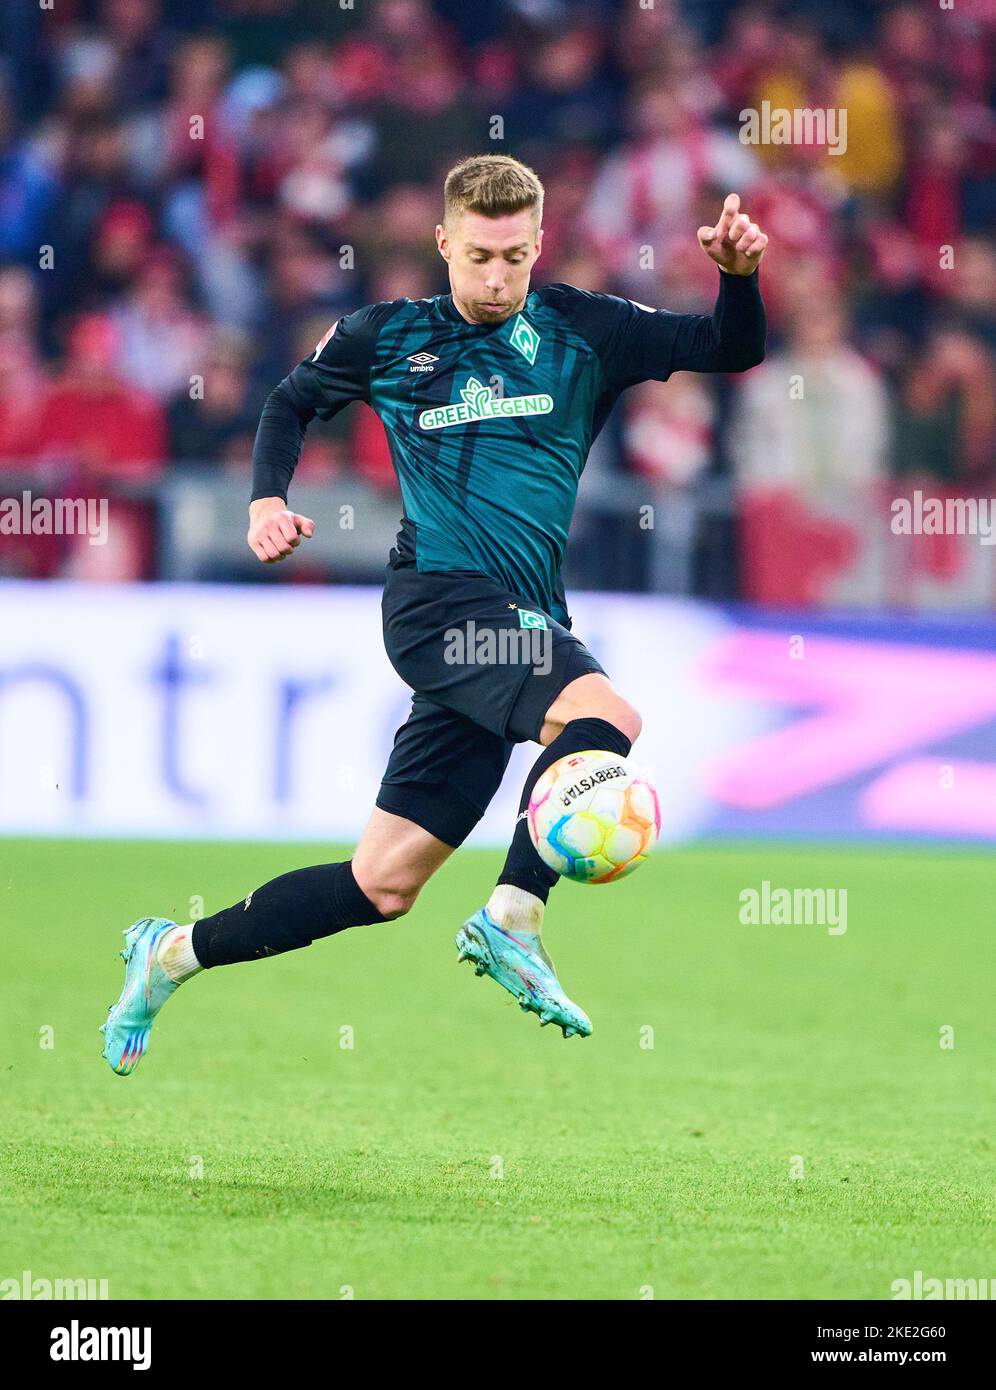 Mitchell Weiser, BRE 8  in the match FC BAYERN MÜNCHEN - SV WERDER BREMEN 6-1 1.German Football League on Nov 8, 2022 in Munich, Germany. Season 2022/2023, matchday 14, 1.Bundesliga, FCB, München, 14.Spieltag © Peter Schatz / Alamy Live News    - DFL REGULATIONS PROHIBIT ANY USE OF PHOTOGRAPHS as IMAGE SEQUENCES and/or QUASI-VIDEO - Stock Photo